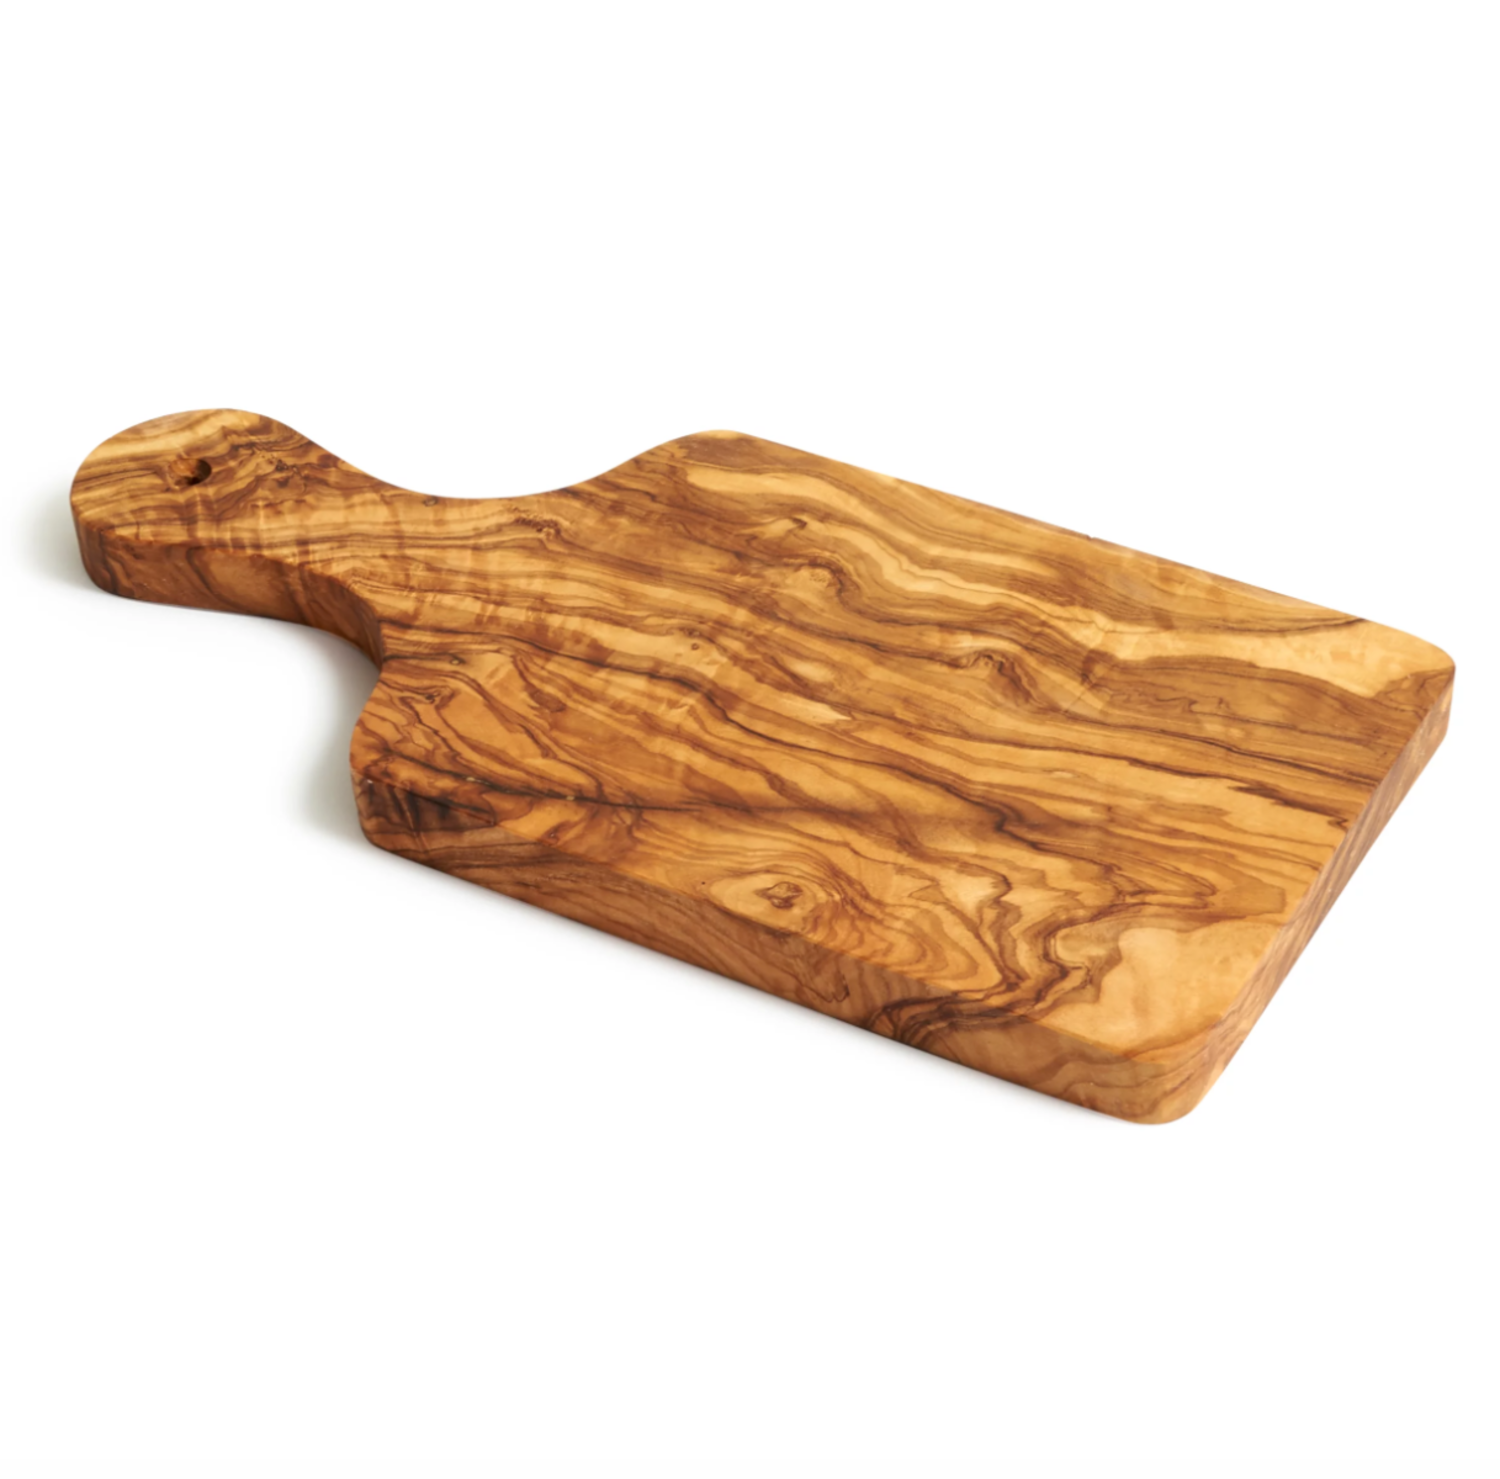 Small Olive Wood Serving Board - Whisk